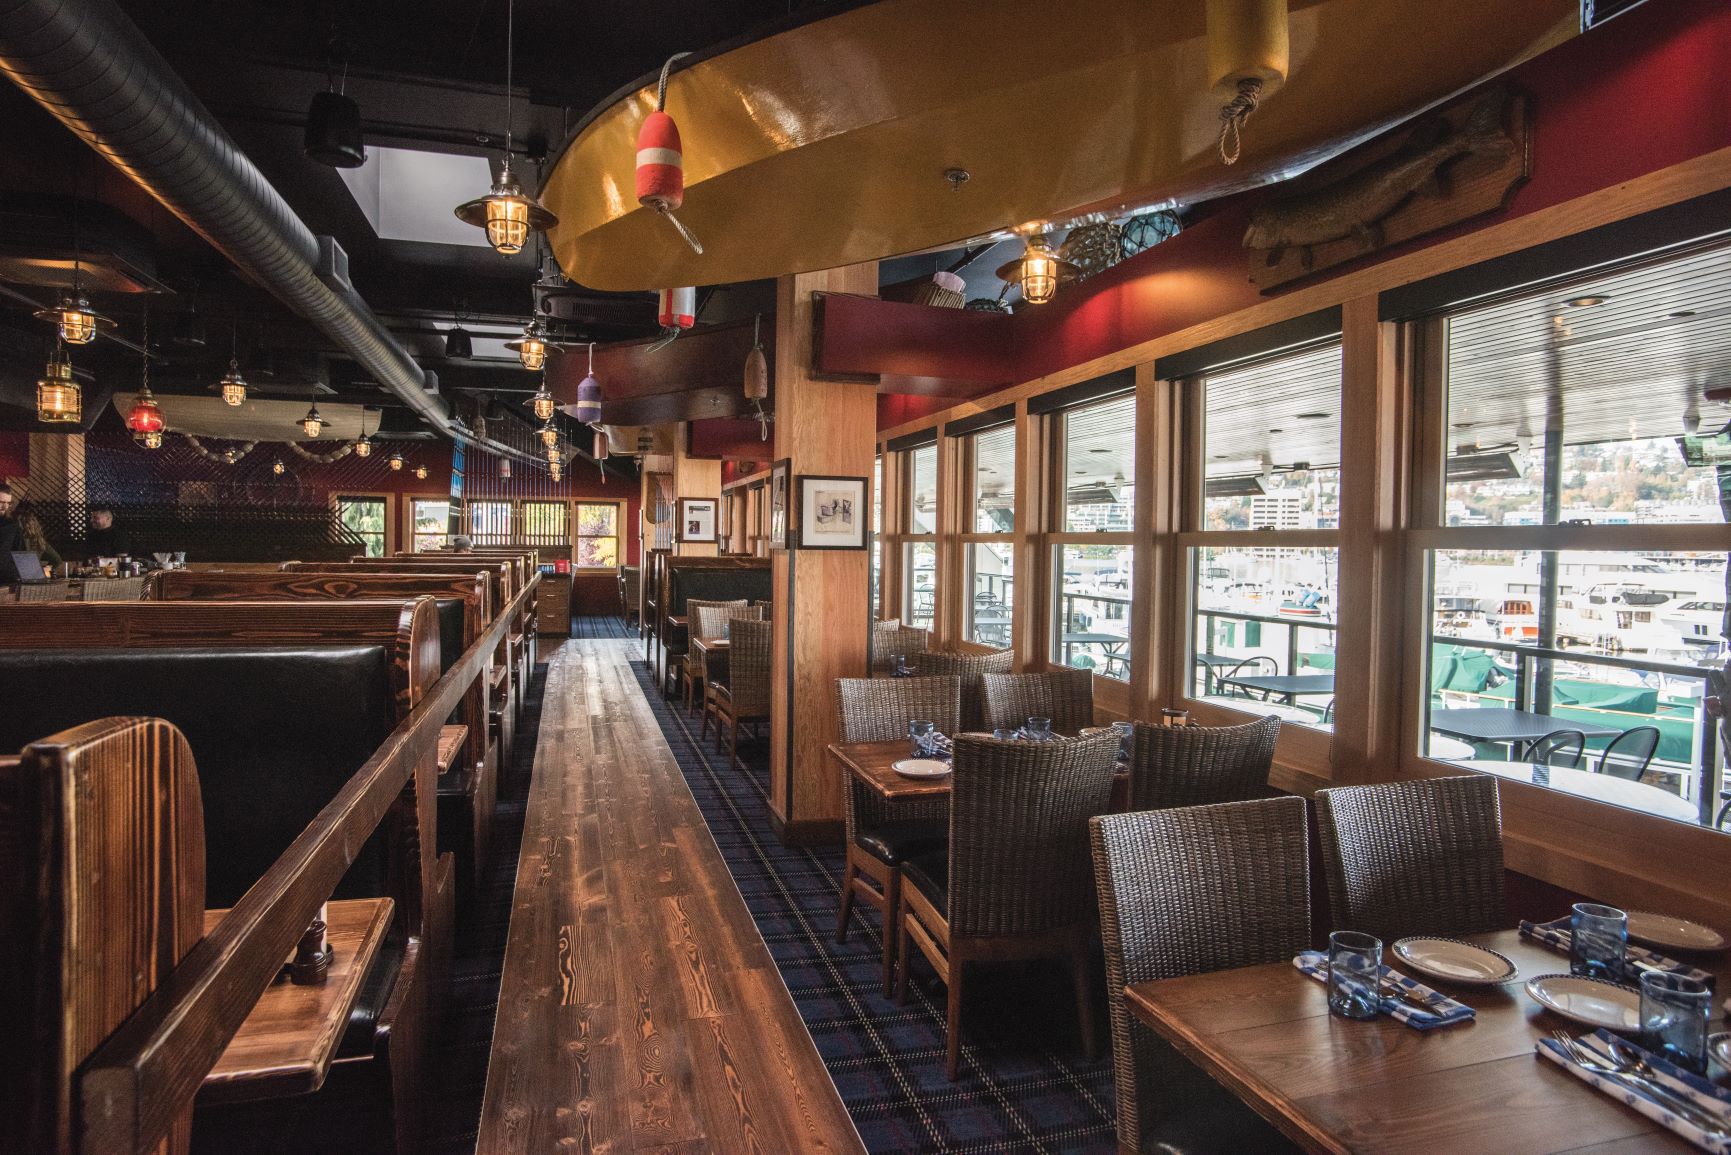 Inside view of Duke's Seafood with its upscale fishing resort interior